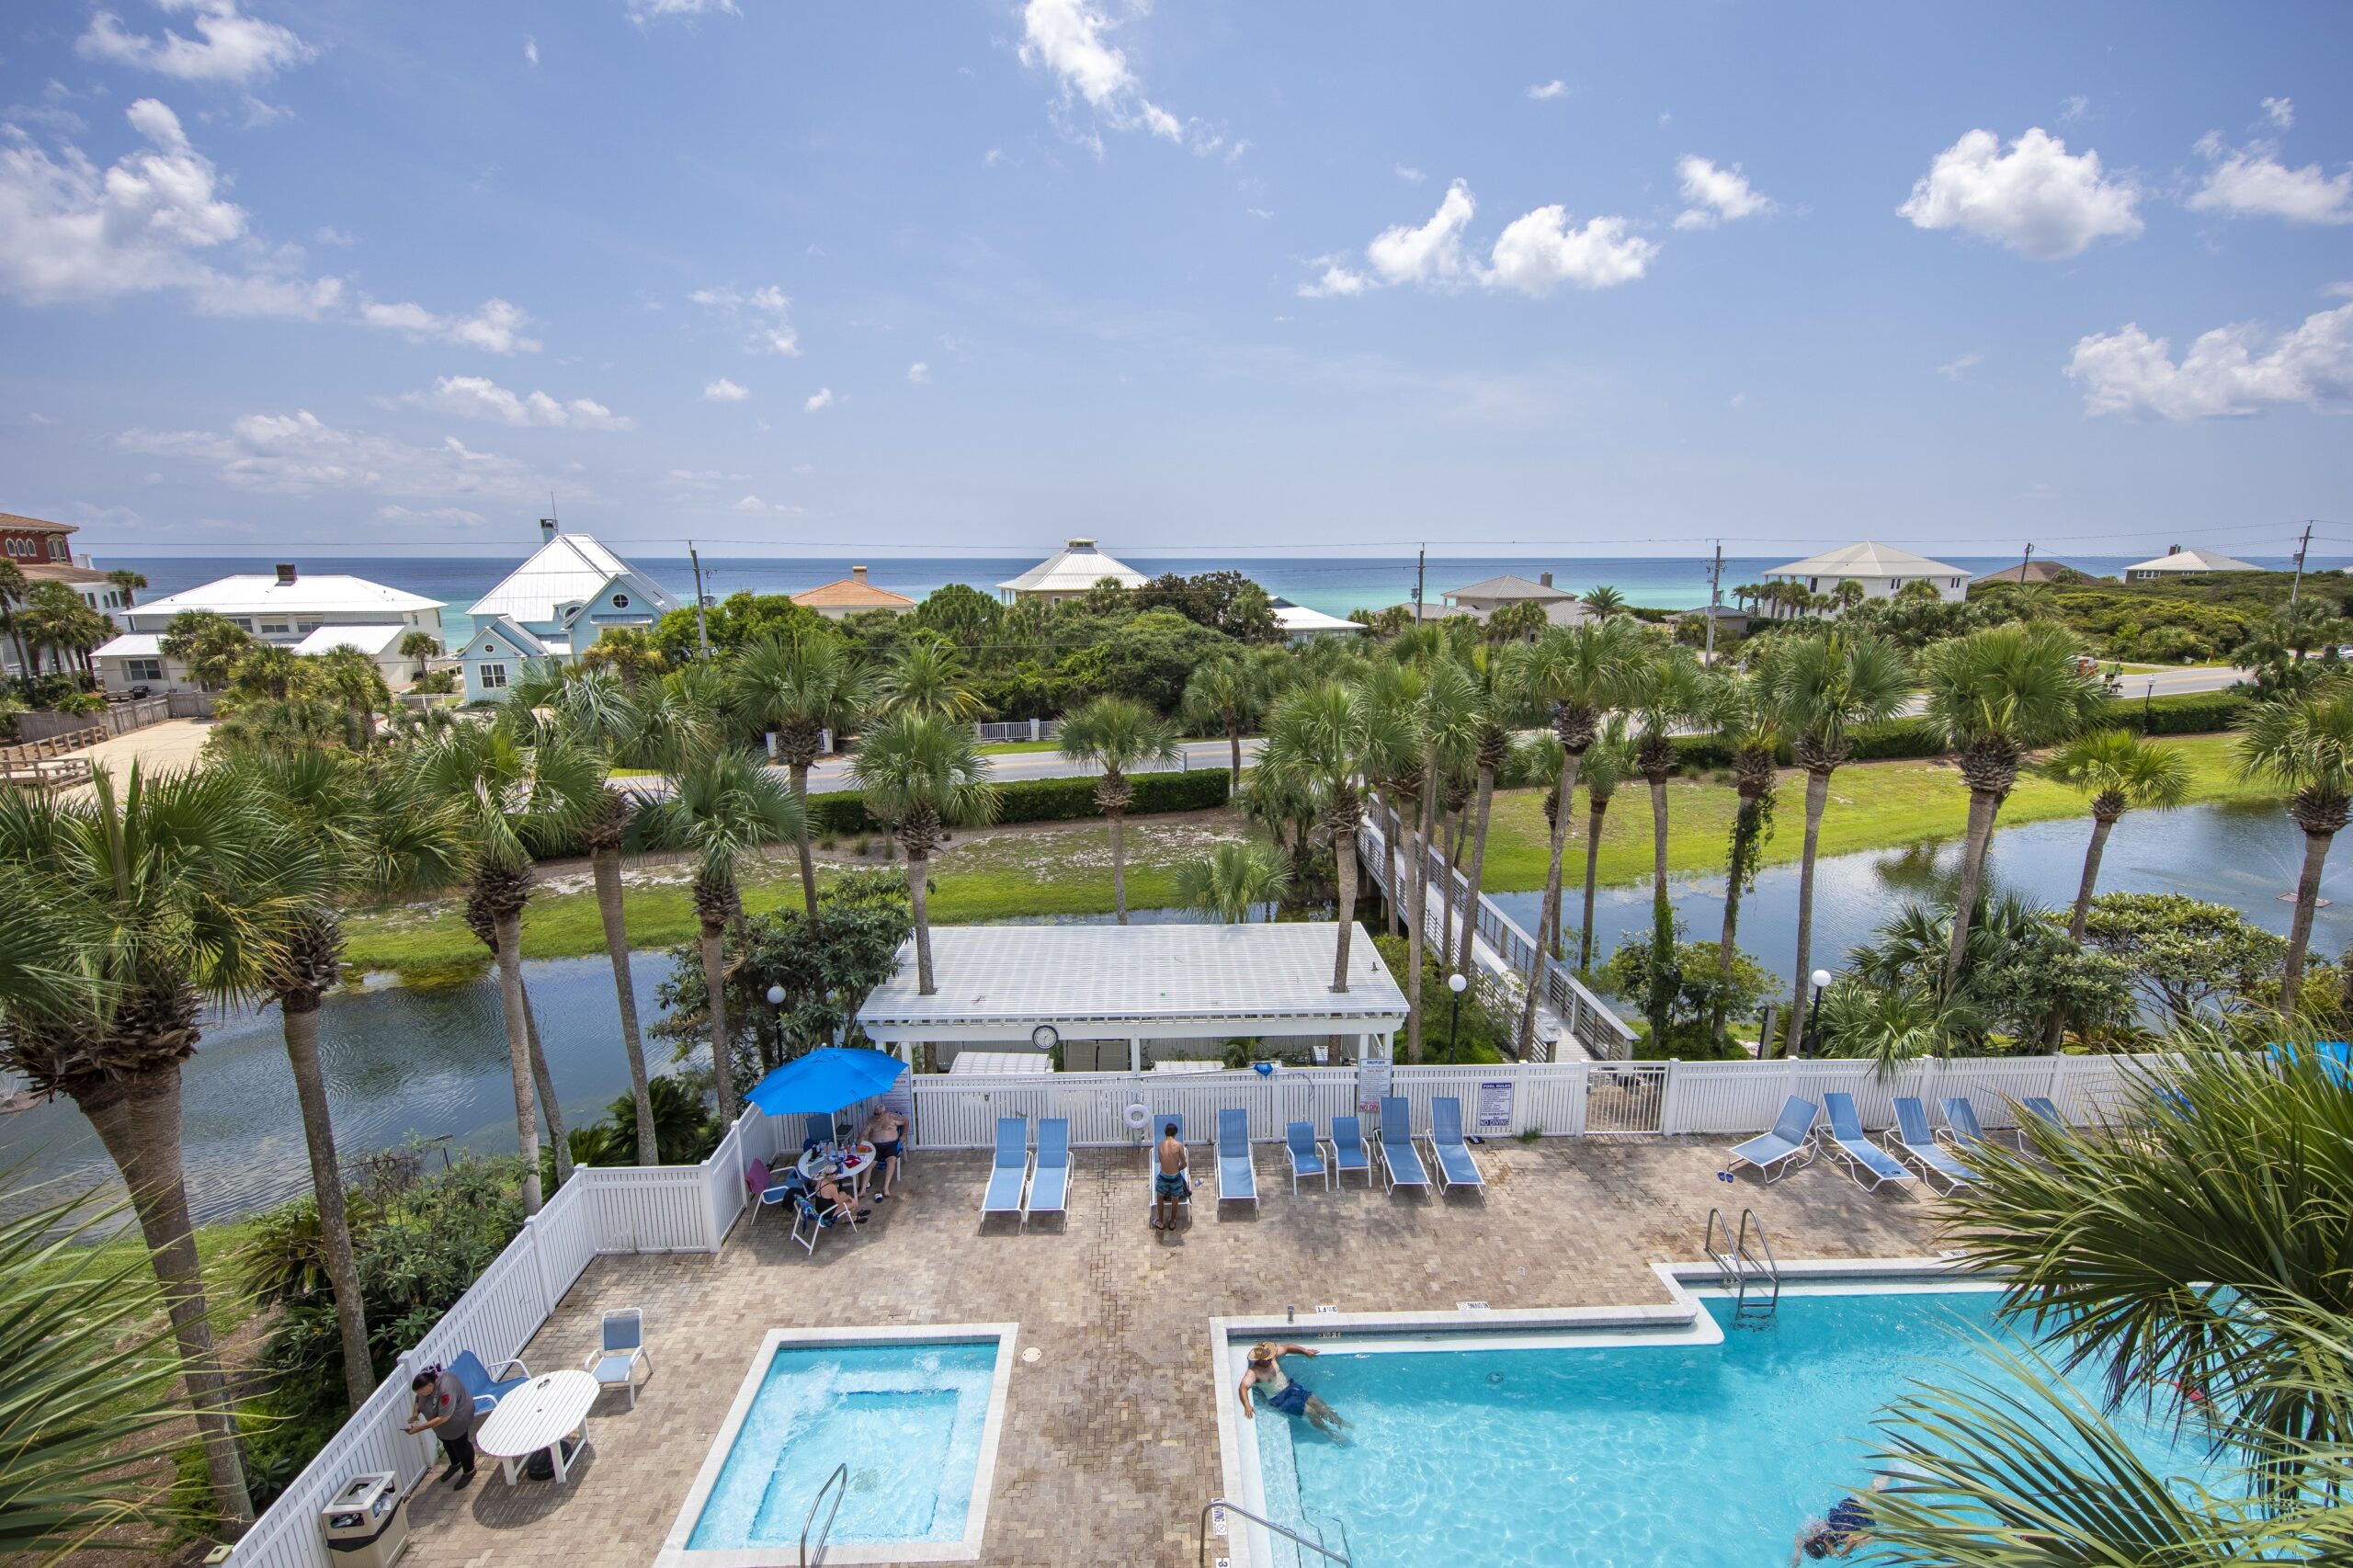 Gulf Place Vacation Rentals